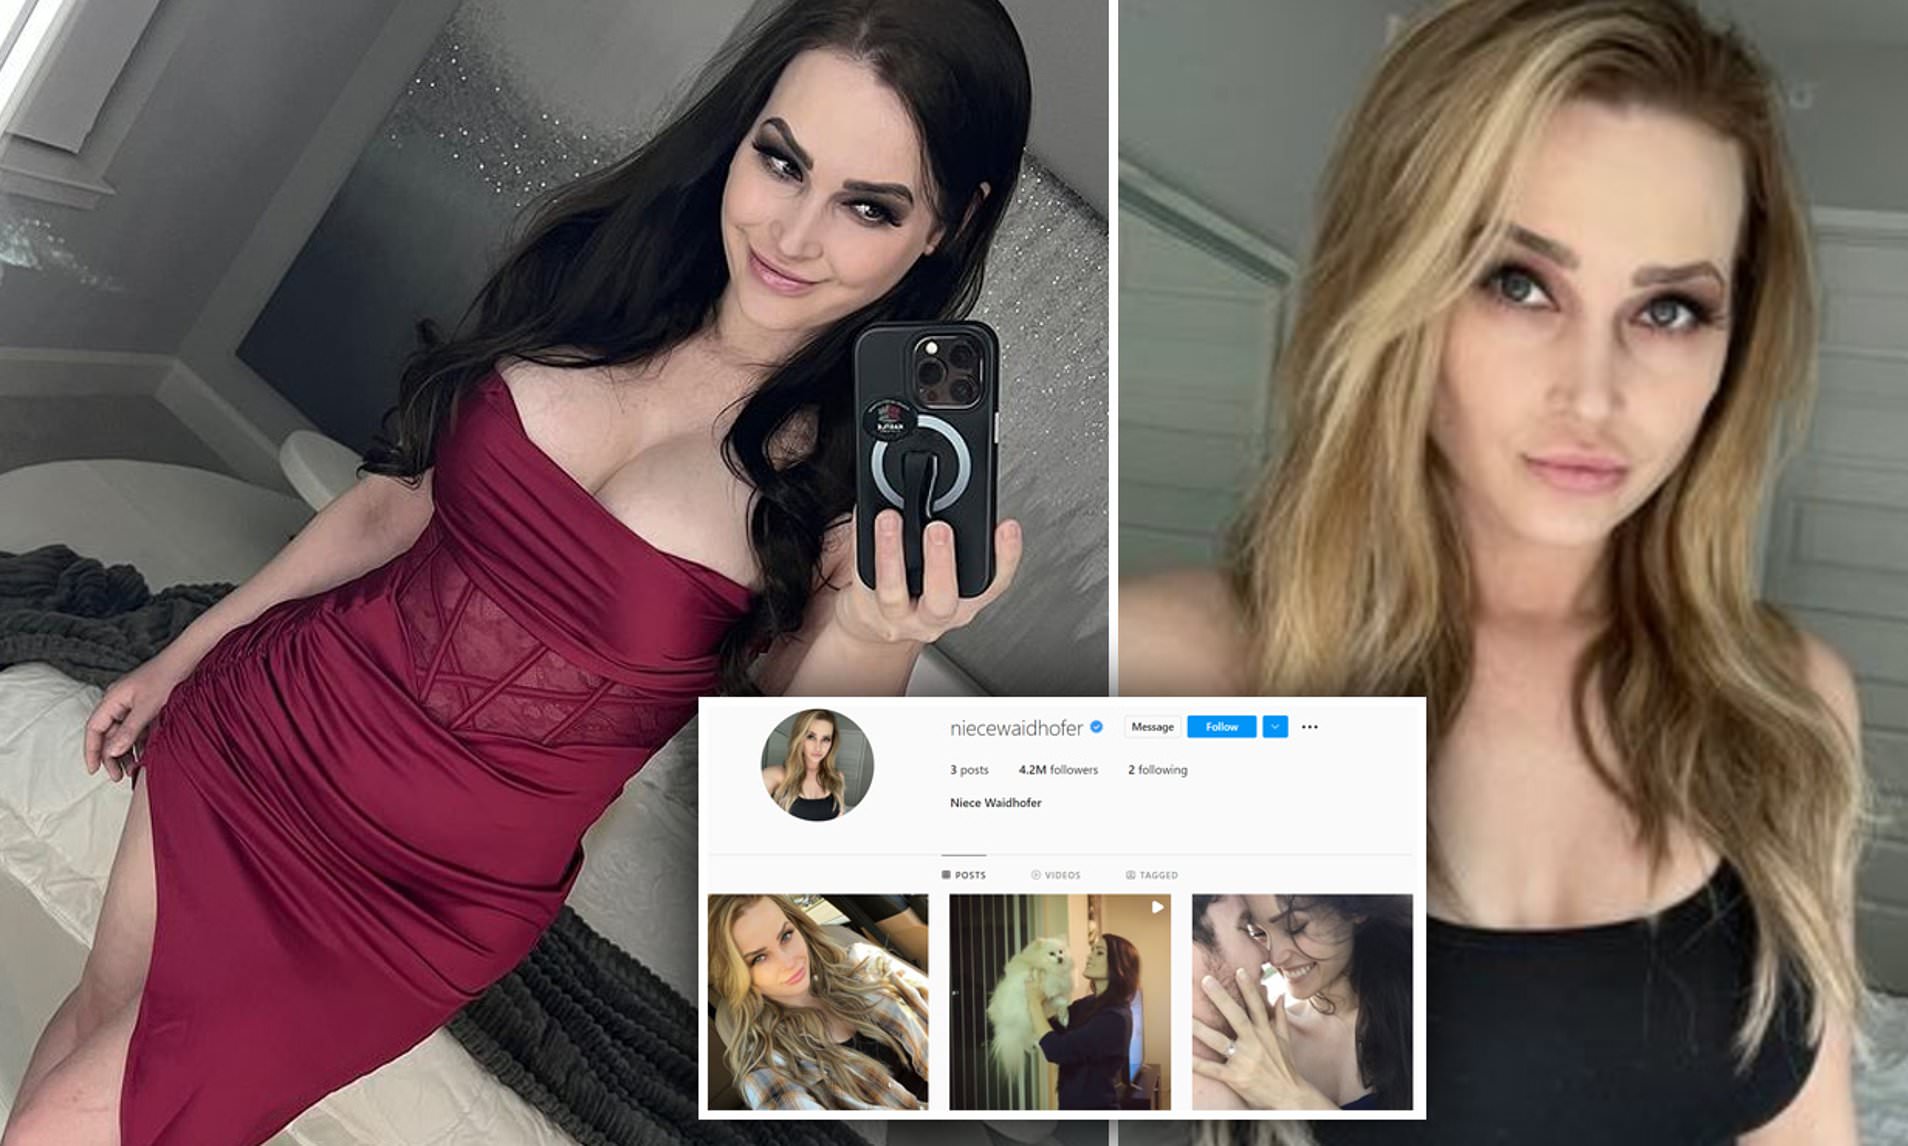 andre core recommends niece waidhofer naked pic